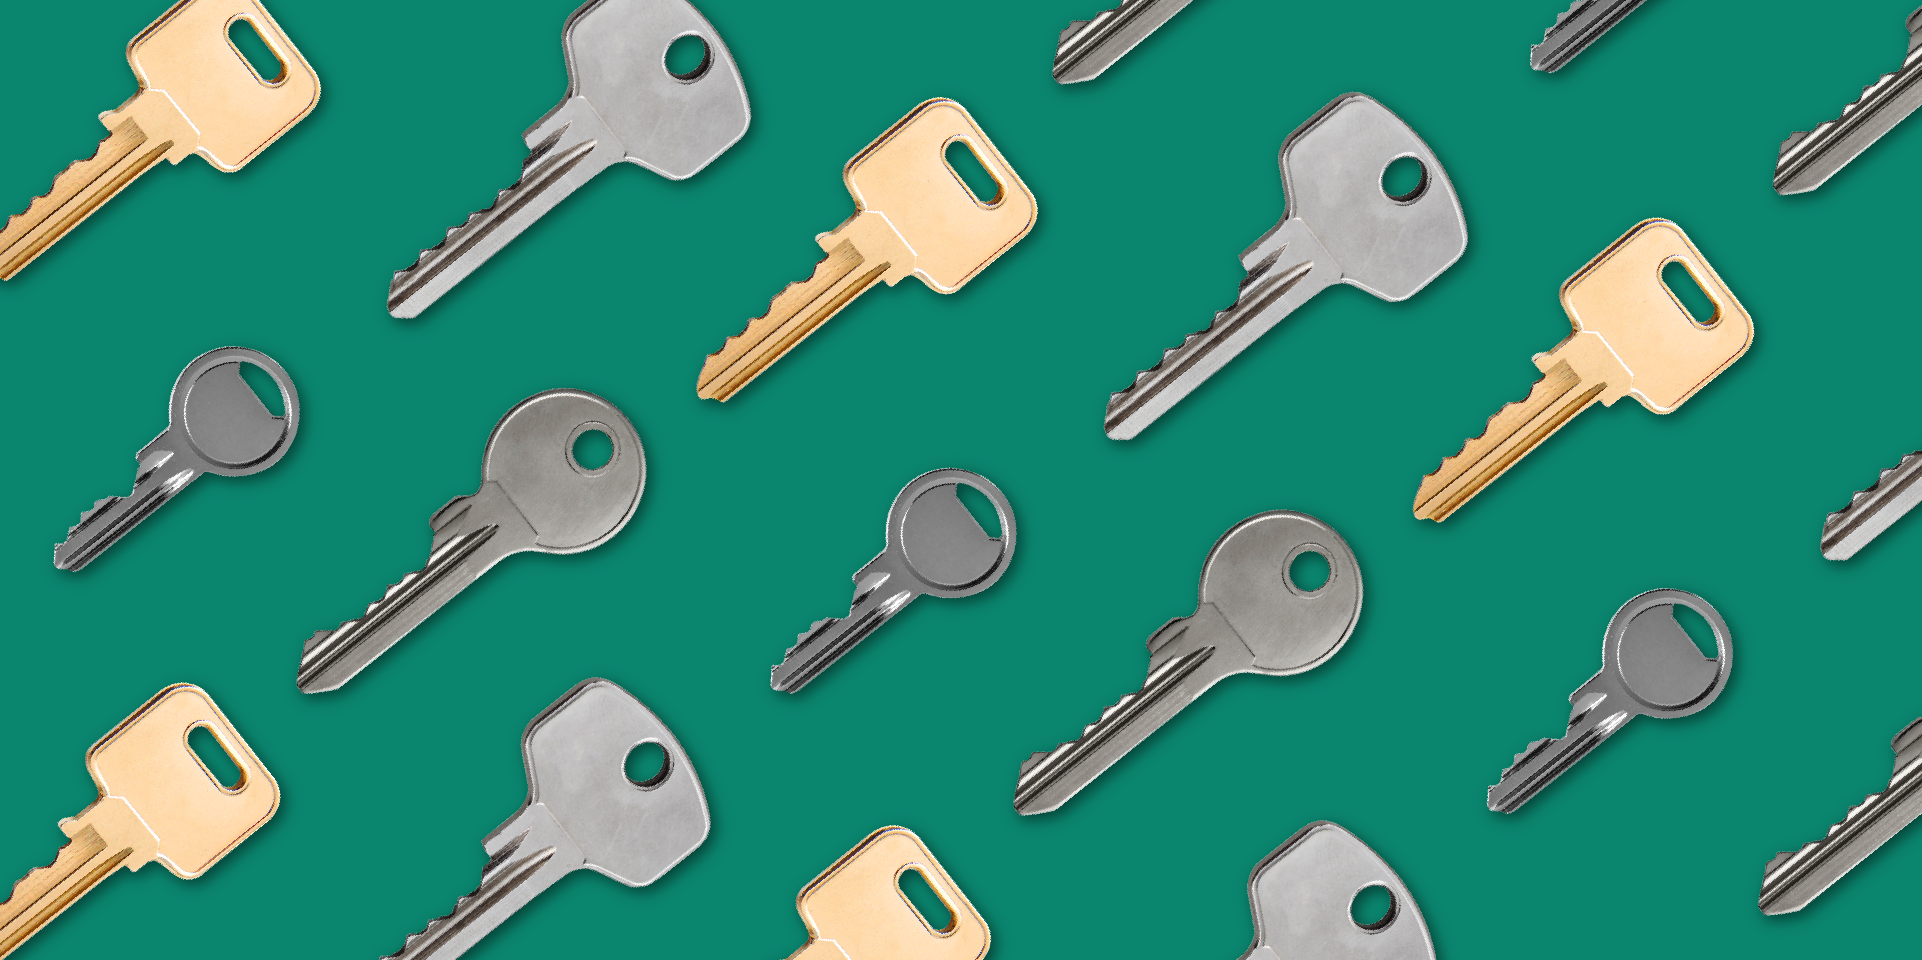 House keys on a green background - What to Know About Down Payments - Properly